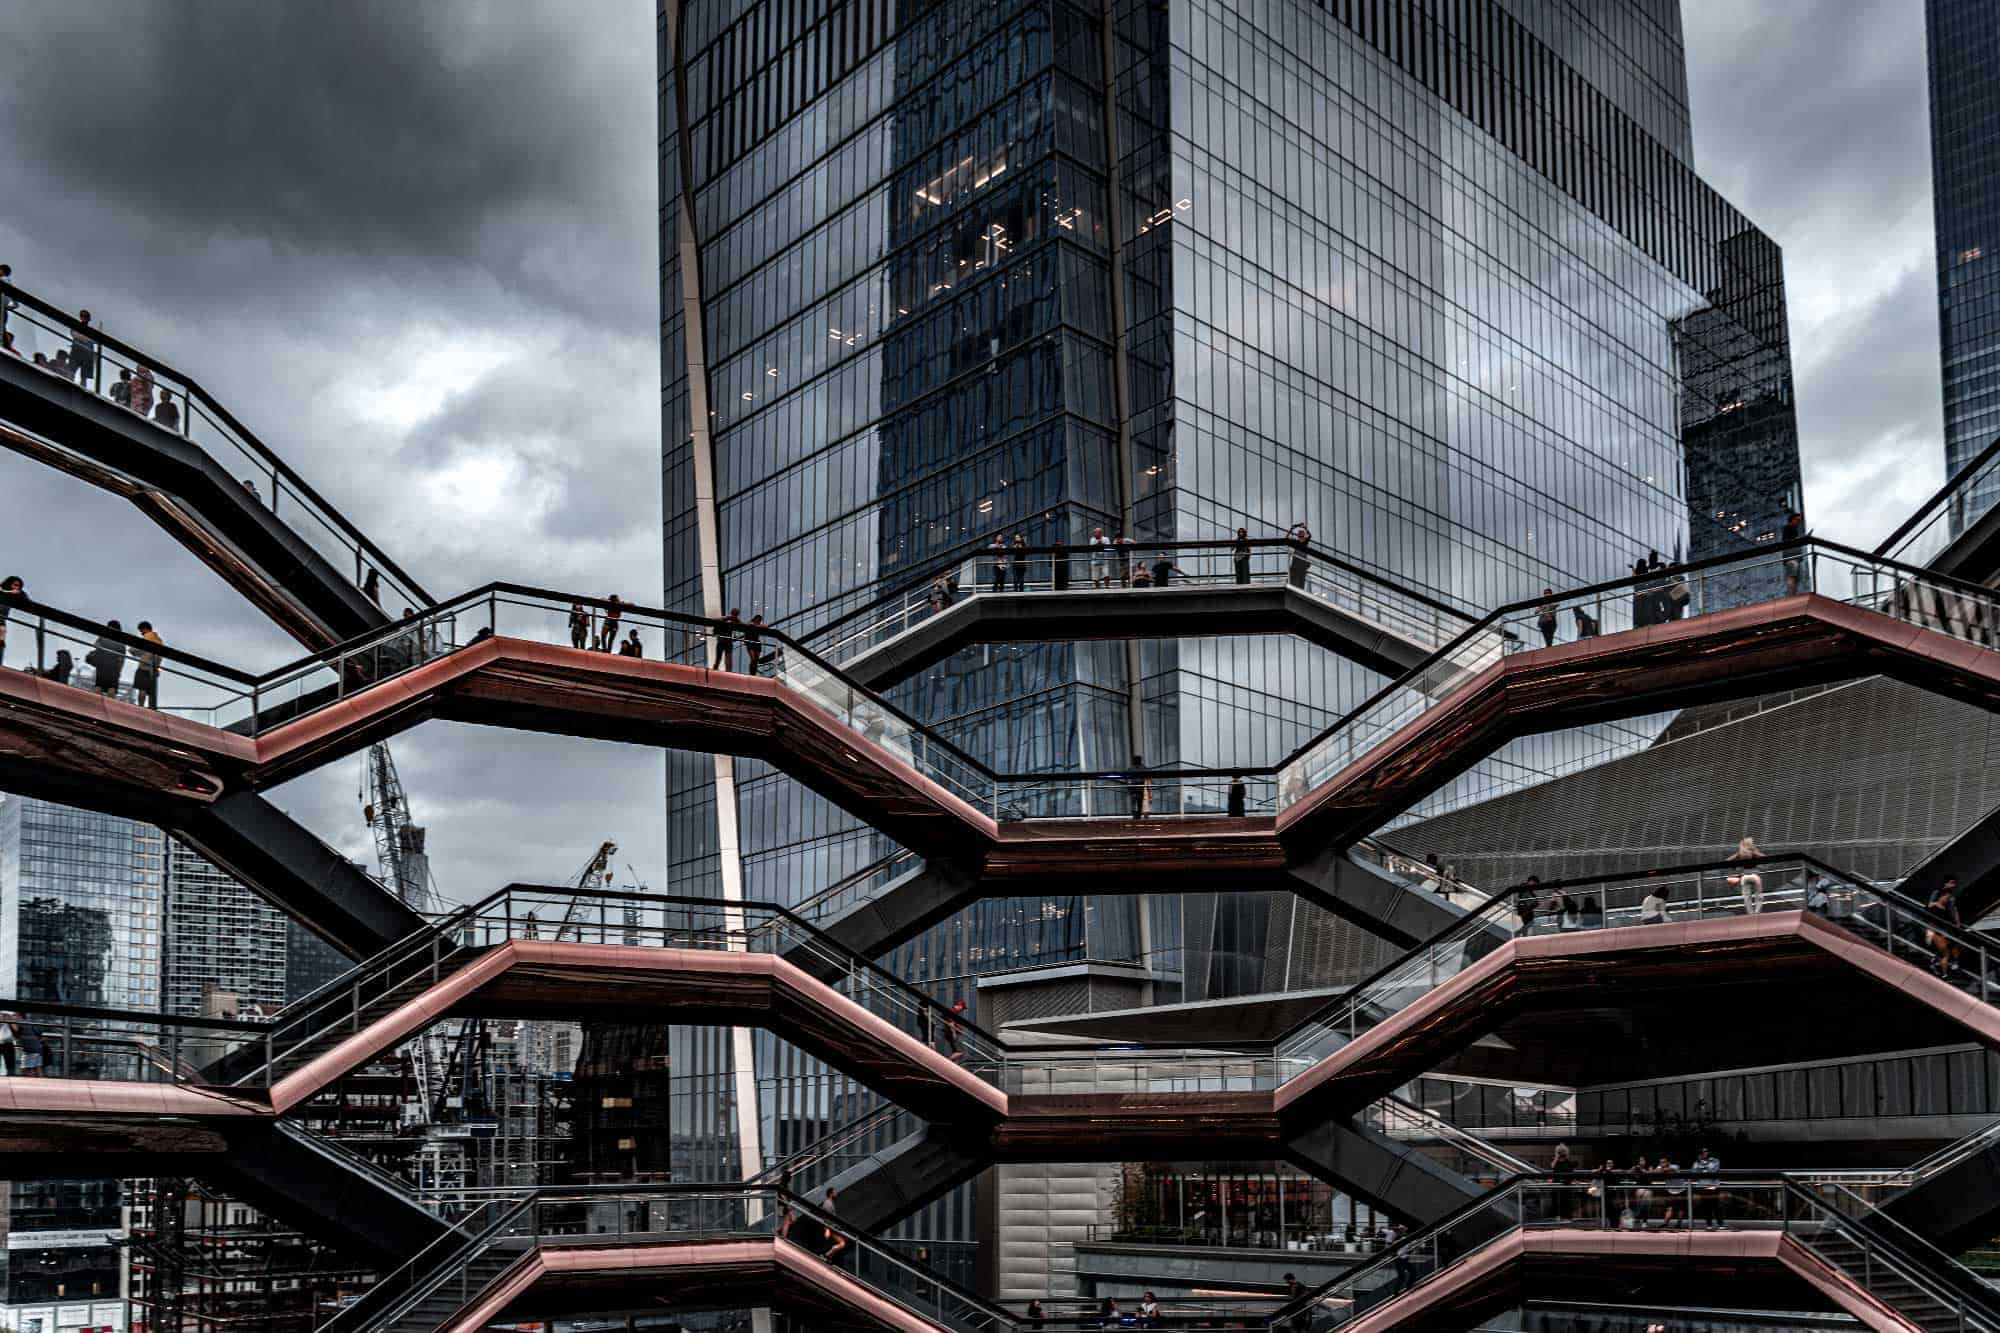 An overcast day at a modern urban structure with intersecting staircases and reflective buildings.